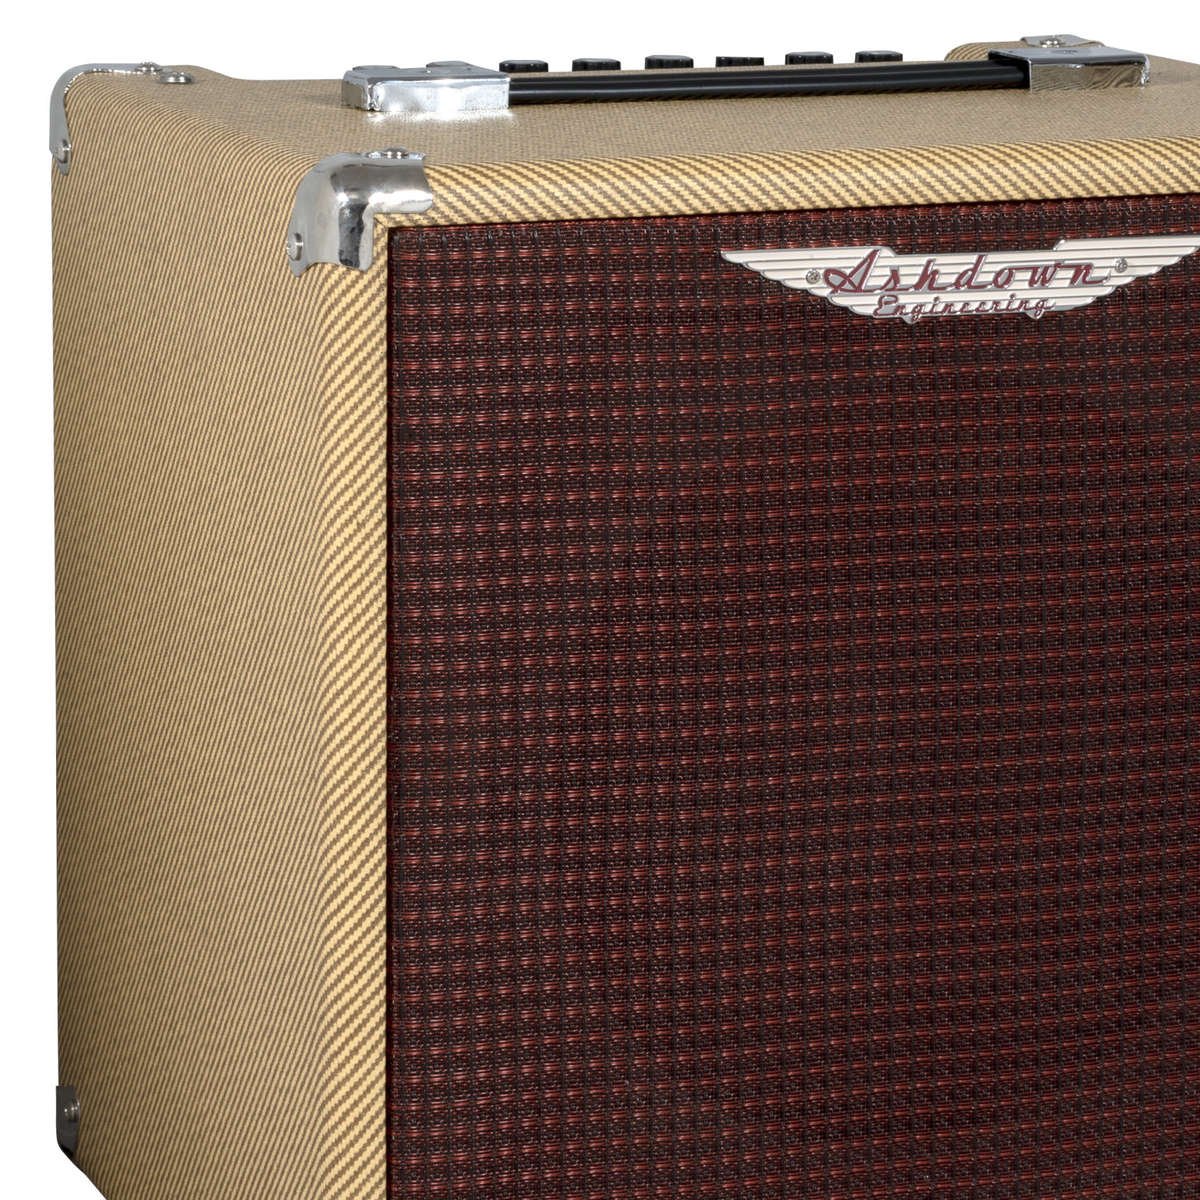 Ashdown Studio 10 Tweed Amp. Close up of cabinet with burgundy grill and leather handle